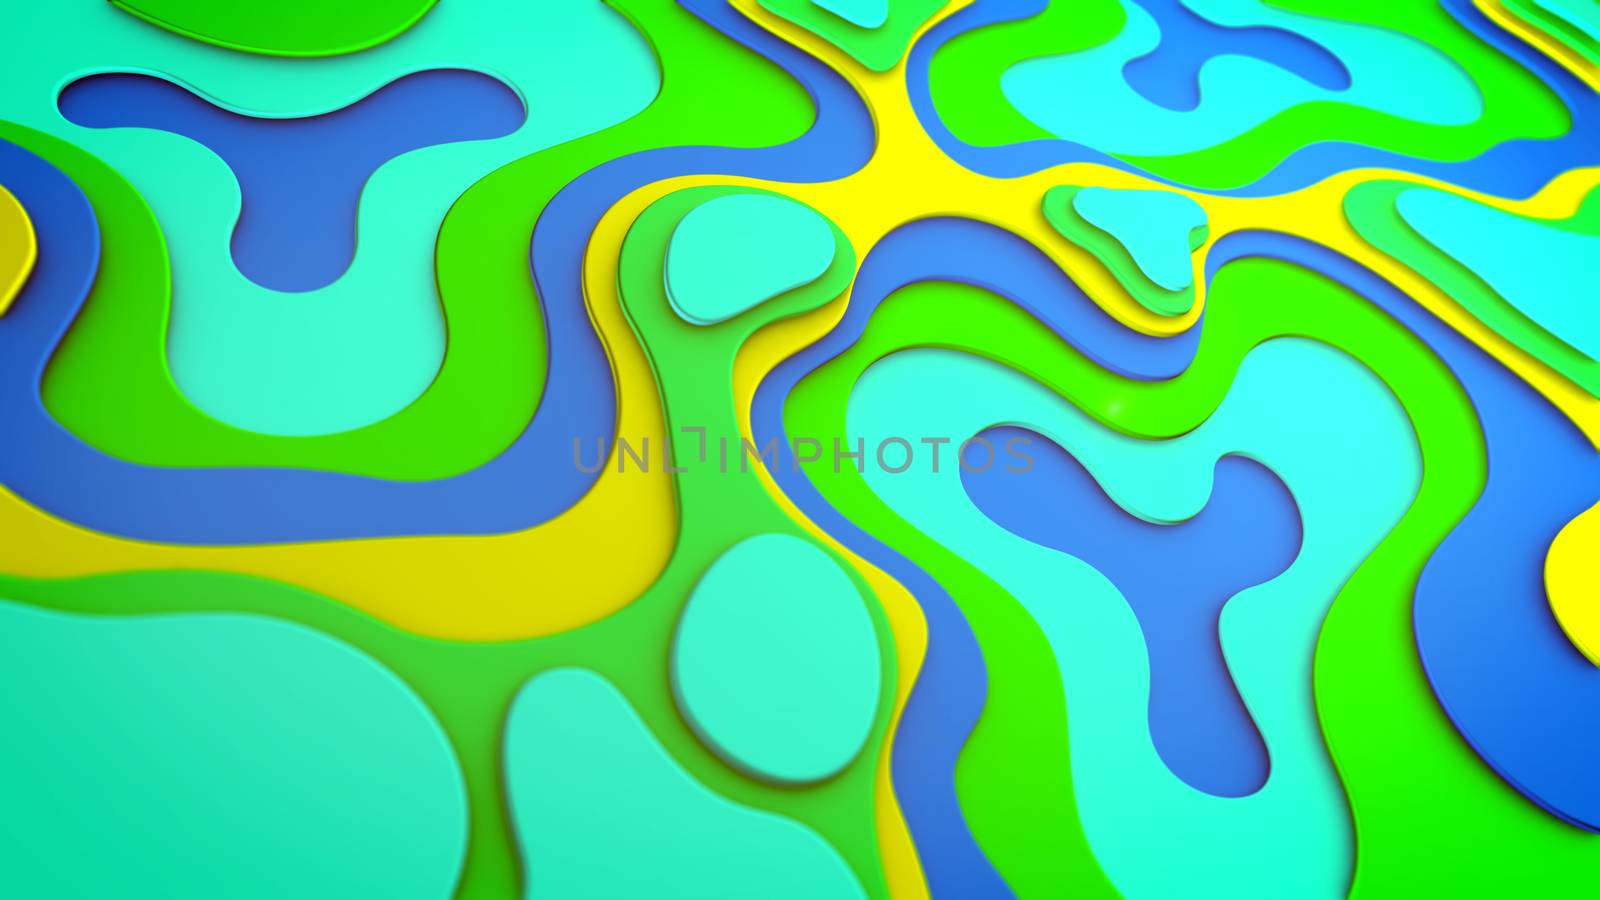 Optical art 3d illustration of curvy green and blue plastic blobs and spots placed askew in a cheerful and jolly way. They generate the spirit of celebration, optimism and innovaton.